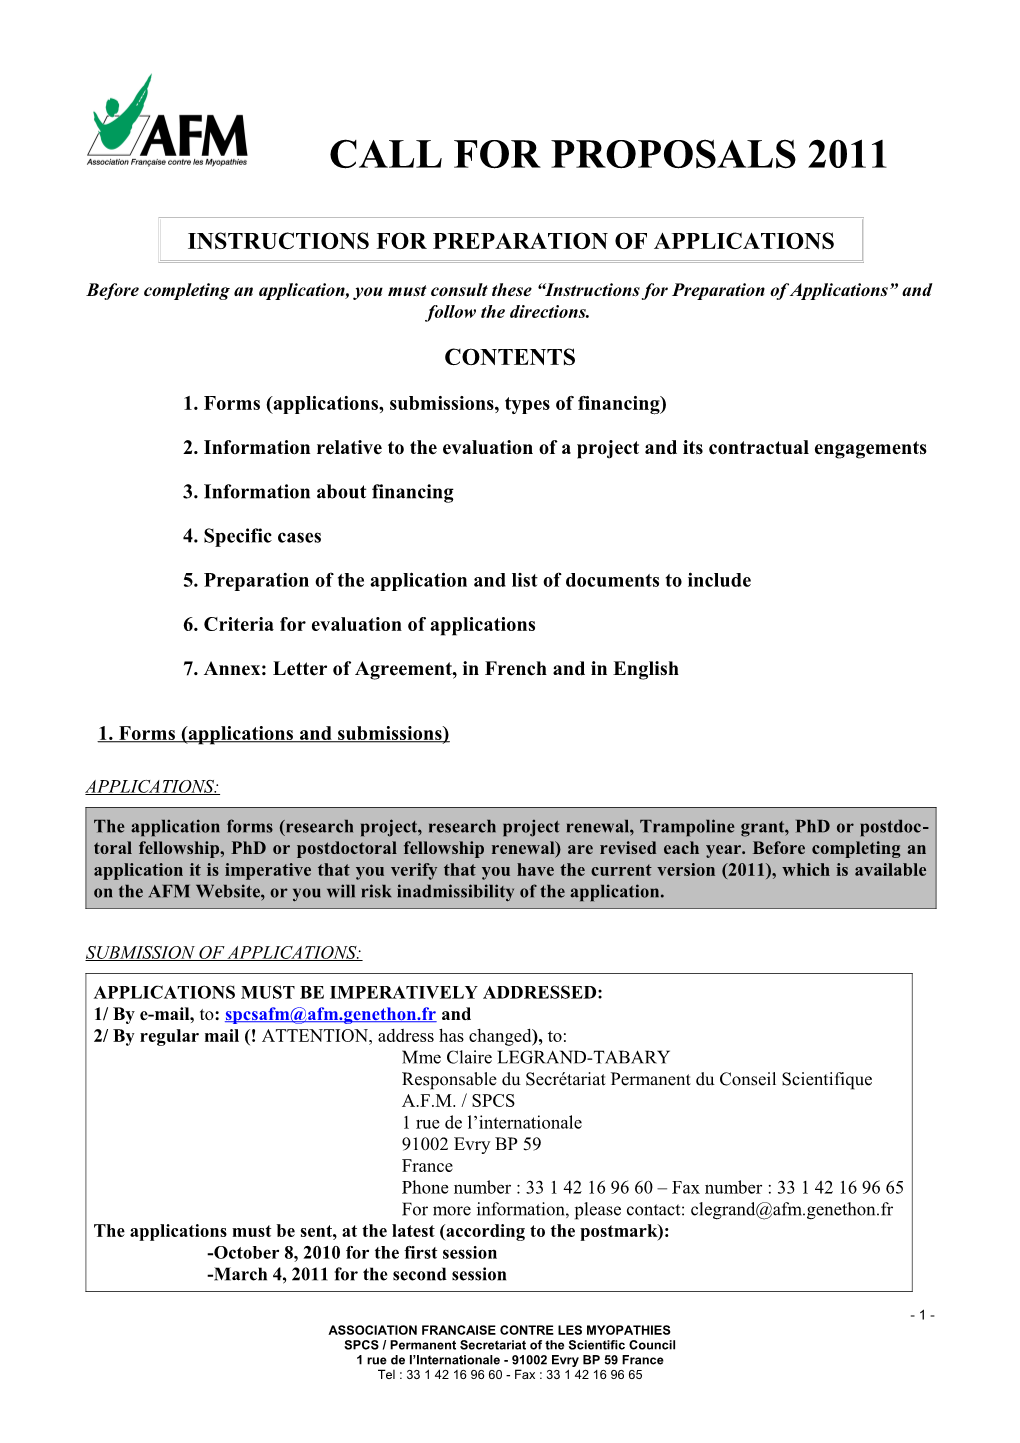 Instructions for Preparation of Applications